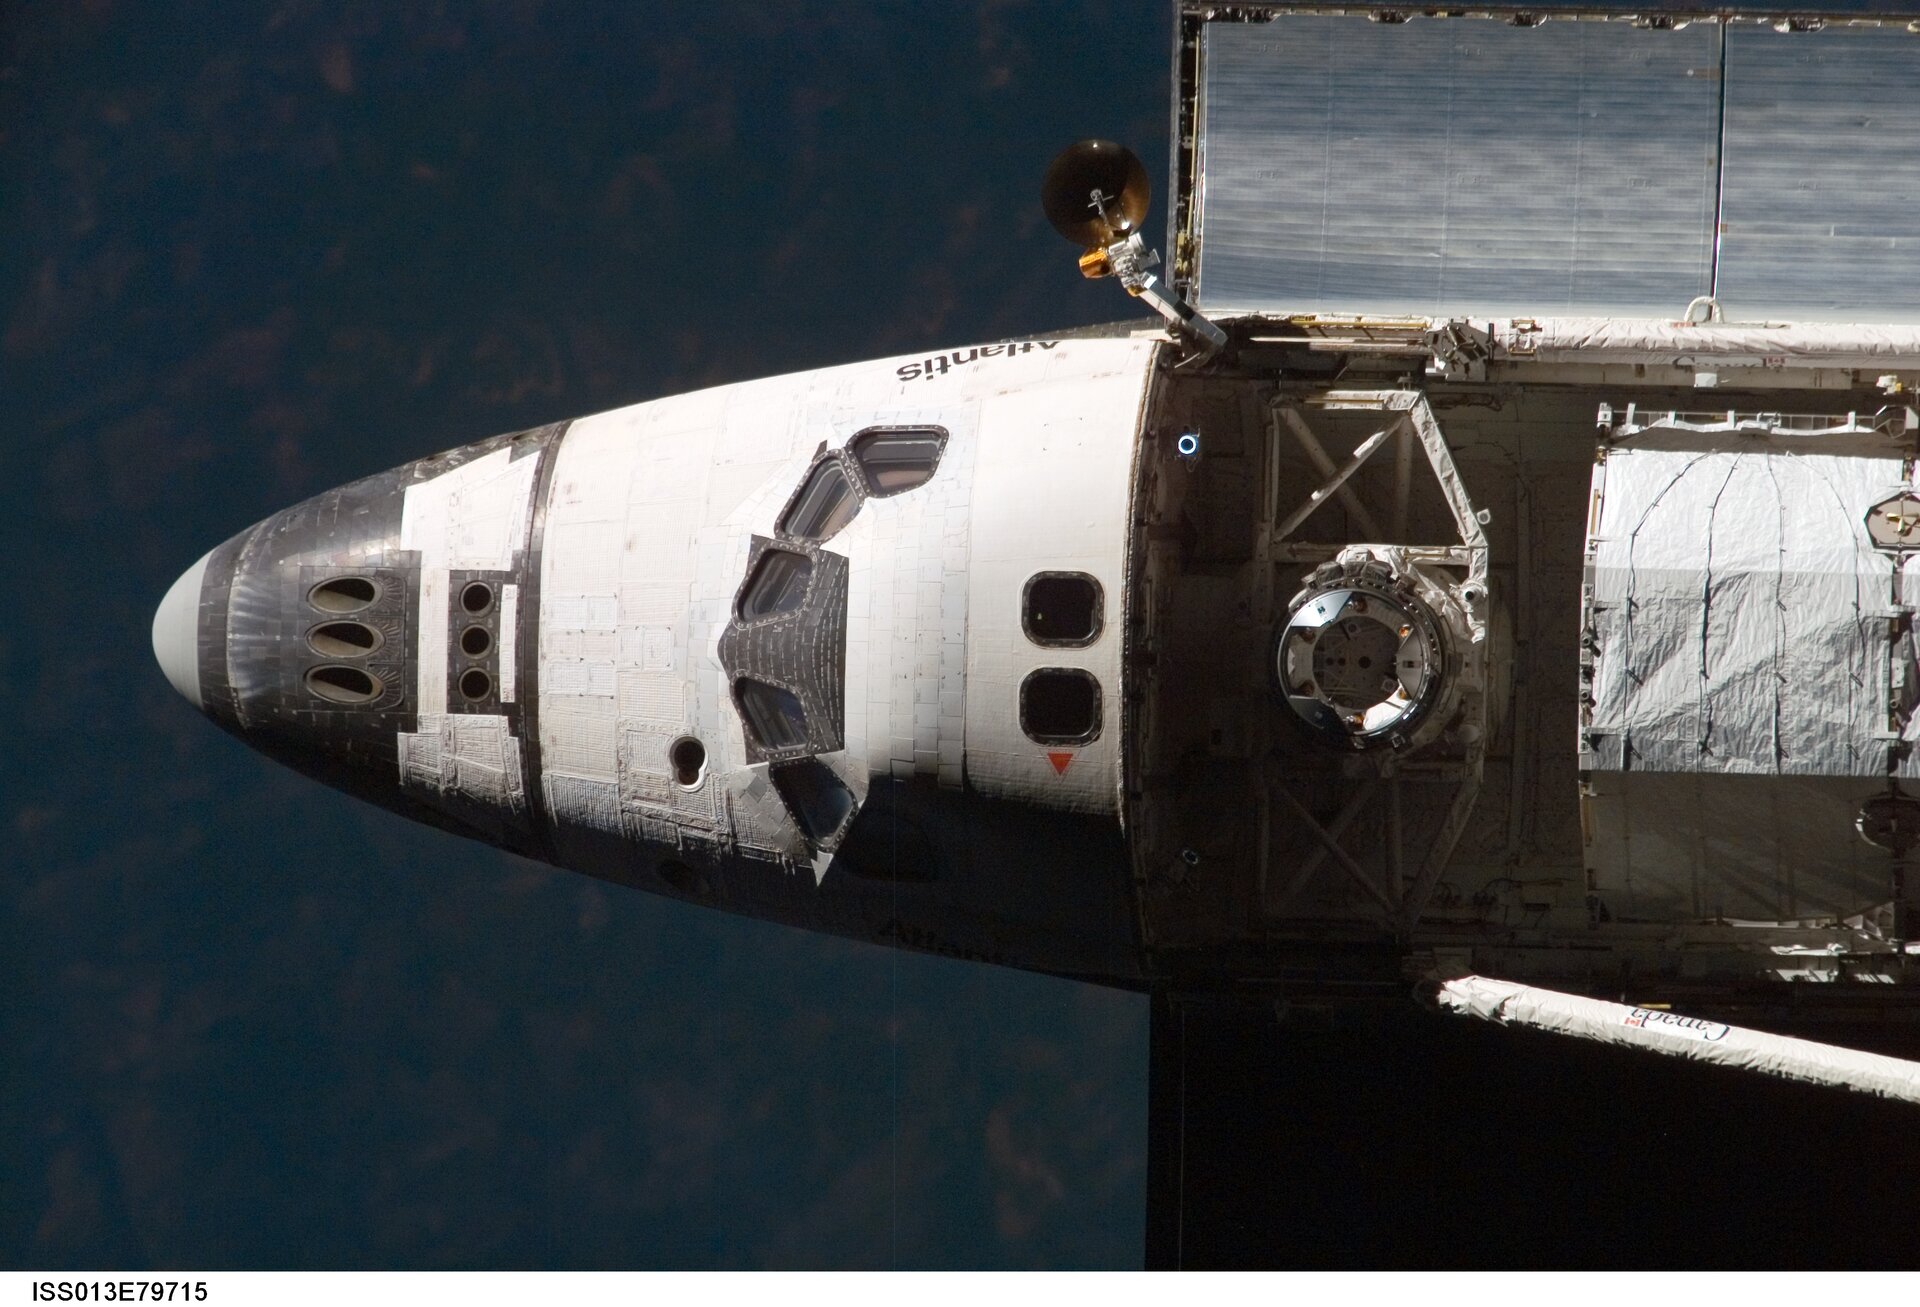 Image of the Space Shuttle approaching the orbital outpost